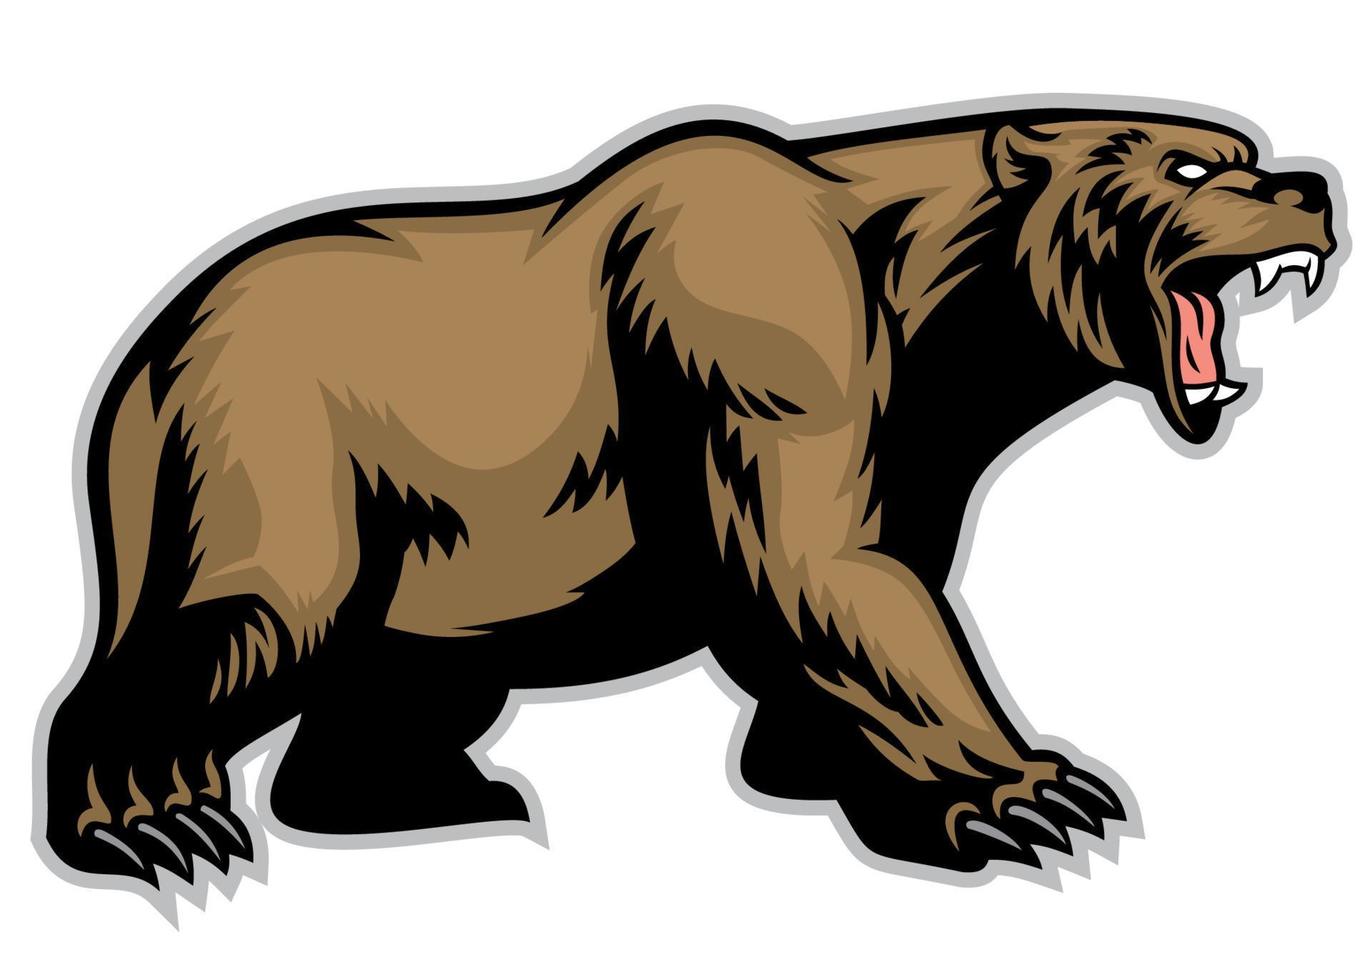 grizzly bear mascot sport logo style vector